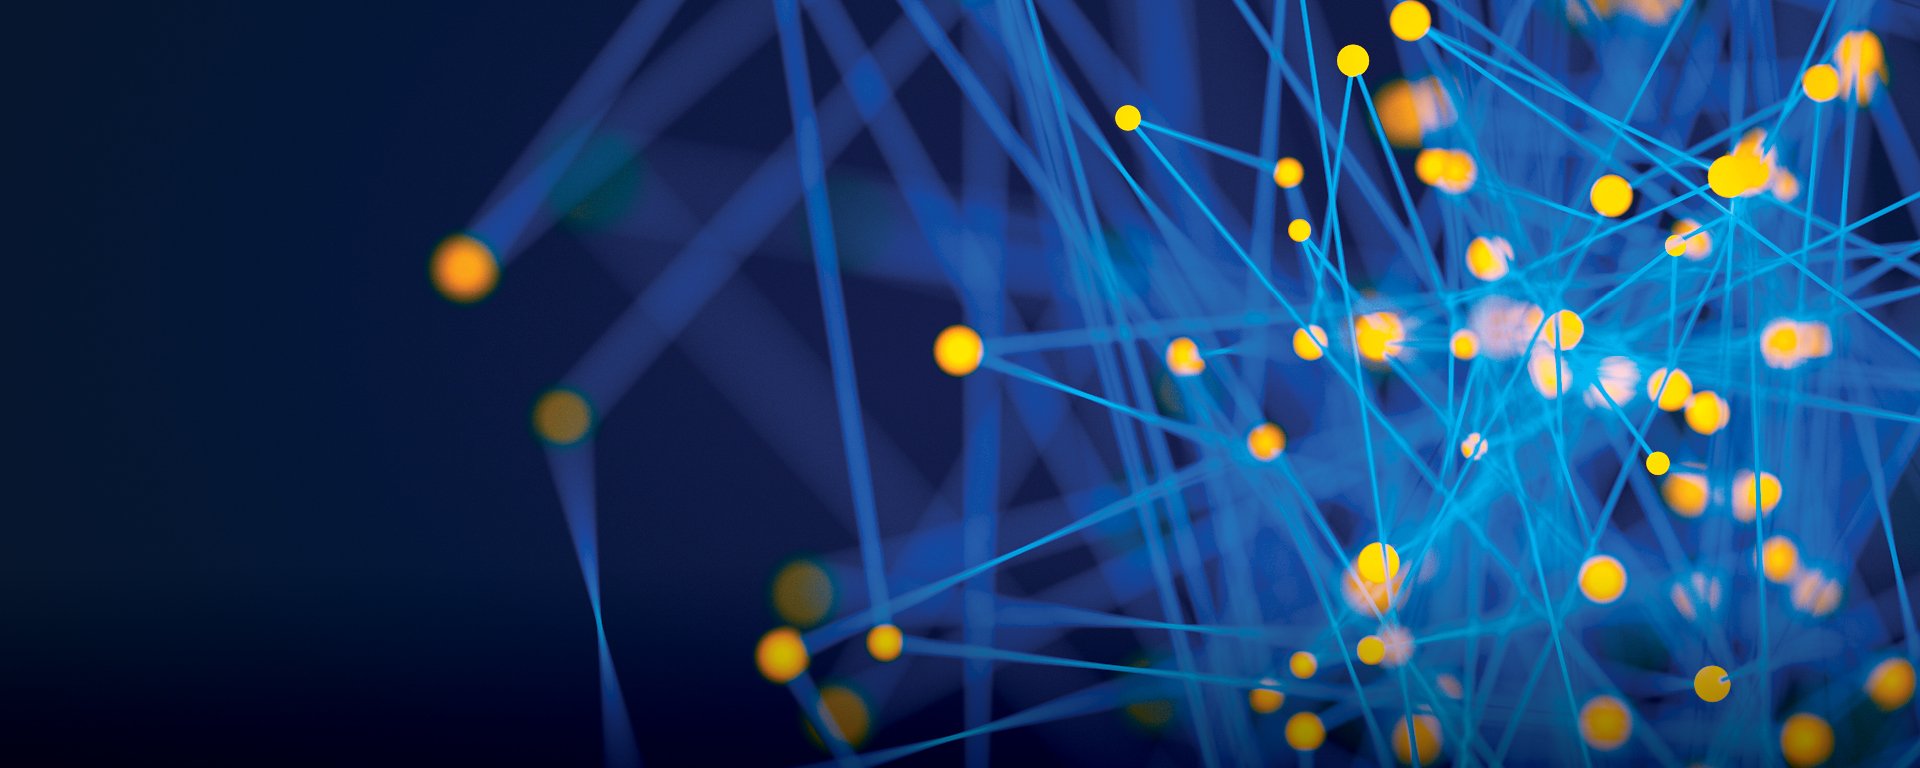 Abstract graphic with overlapping, light blue lines connecting scattered, glowing yellow dots in a network